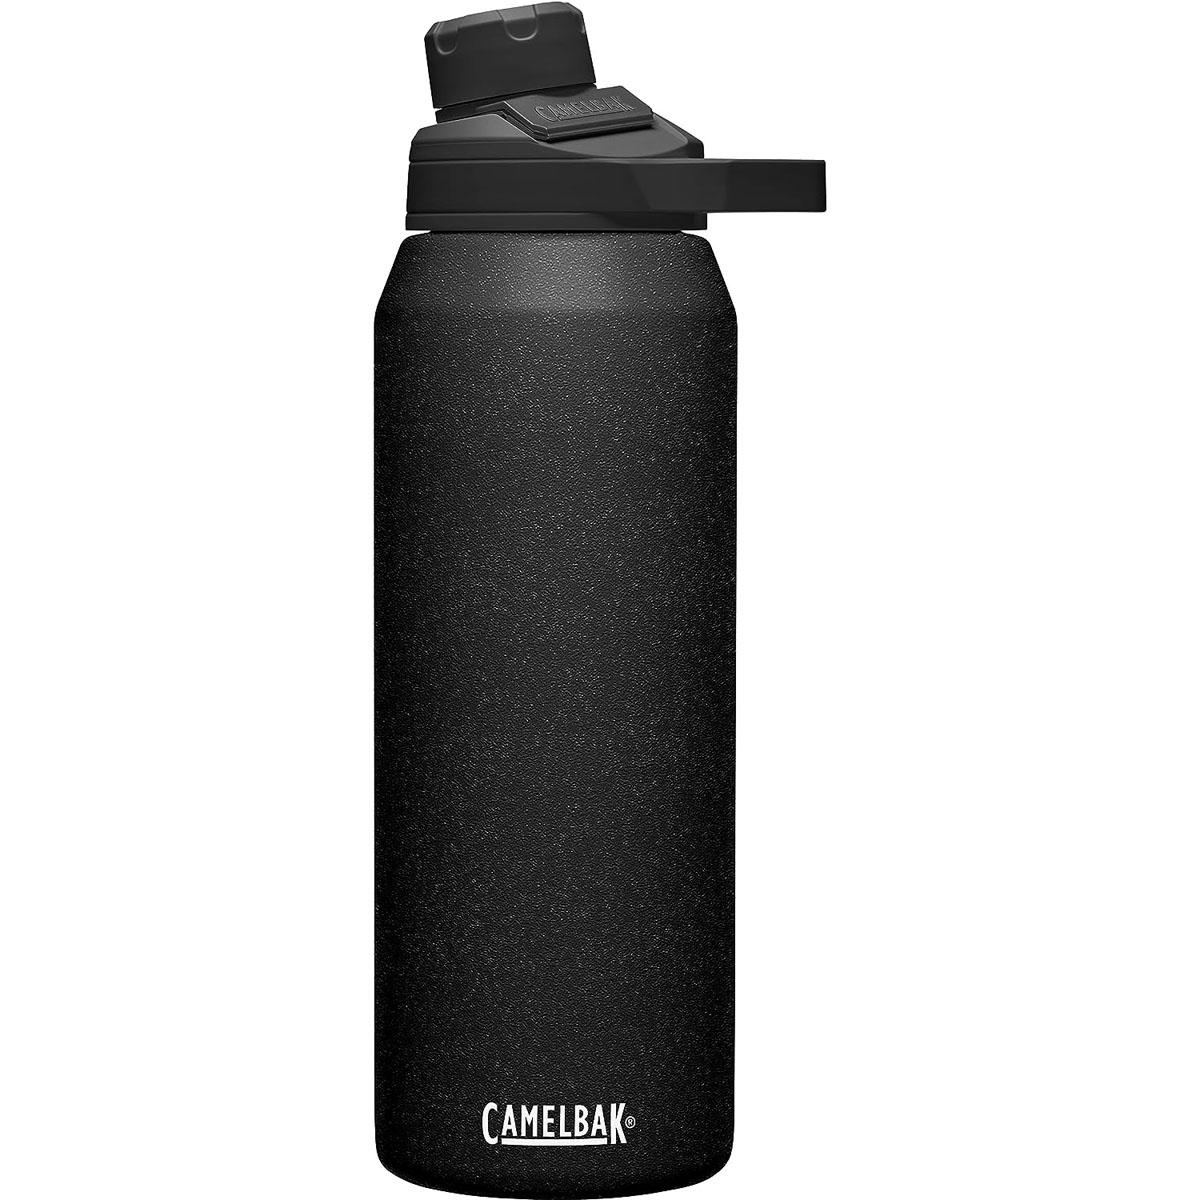 CamelBak Chute Mag 32oz Vacuum Insulated Stainless Steel Water Bottle for $16.79